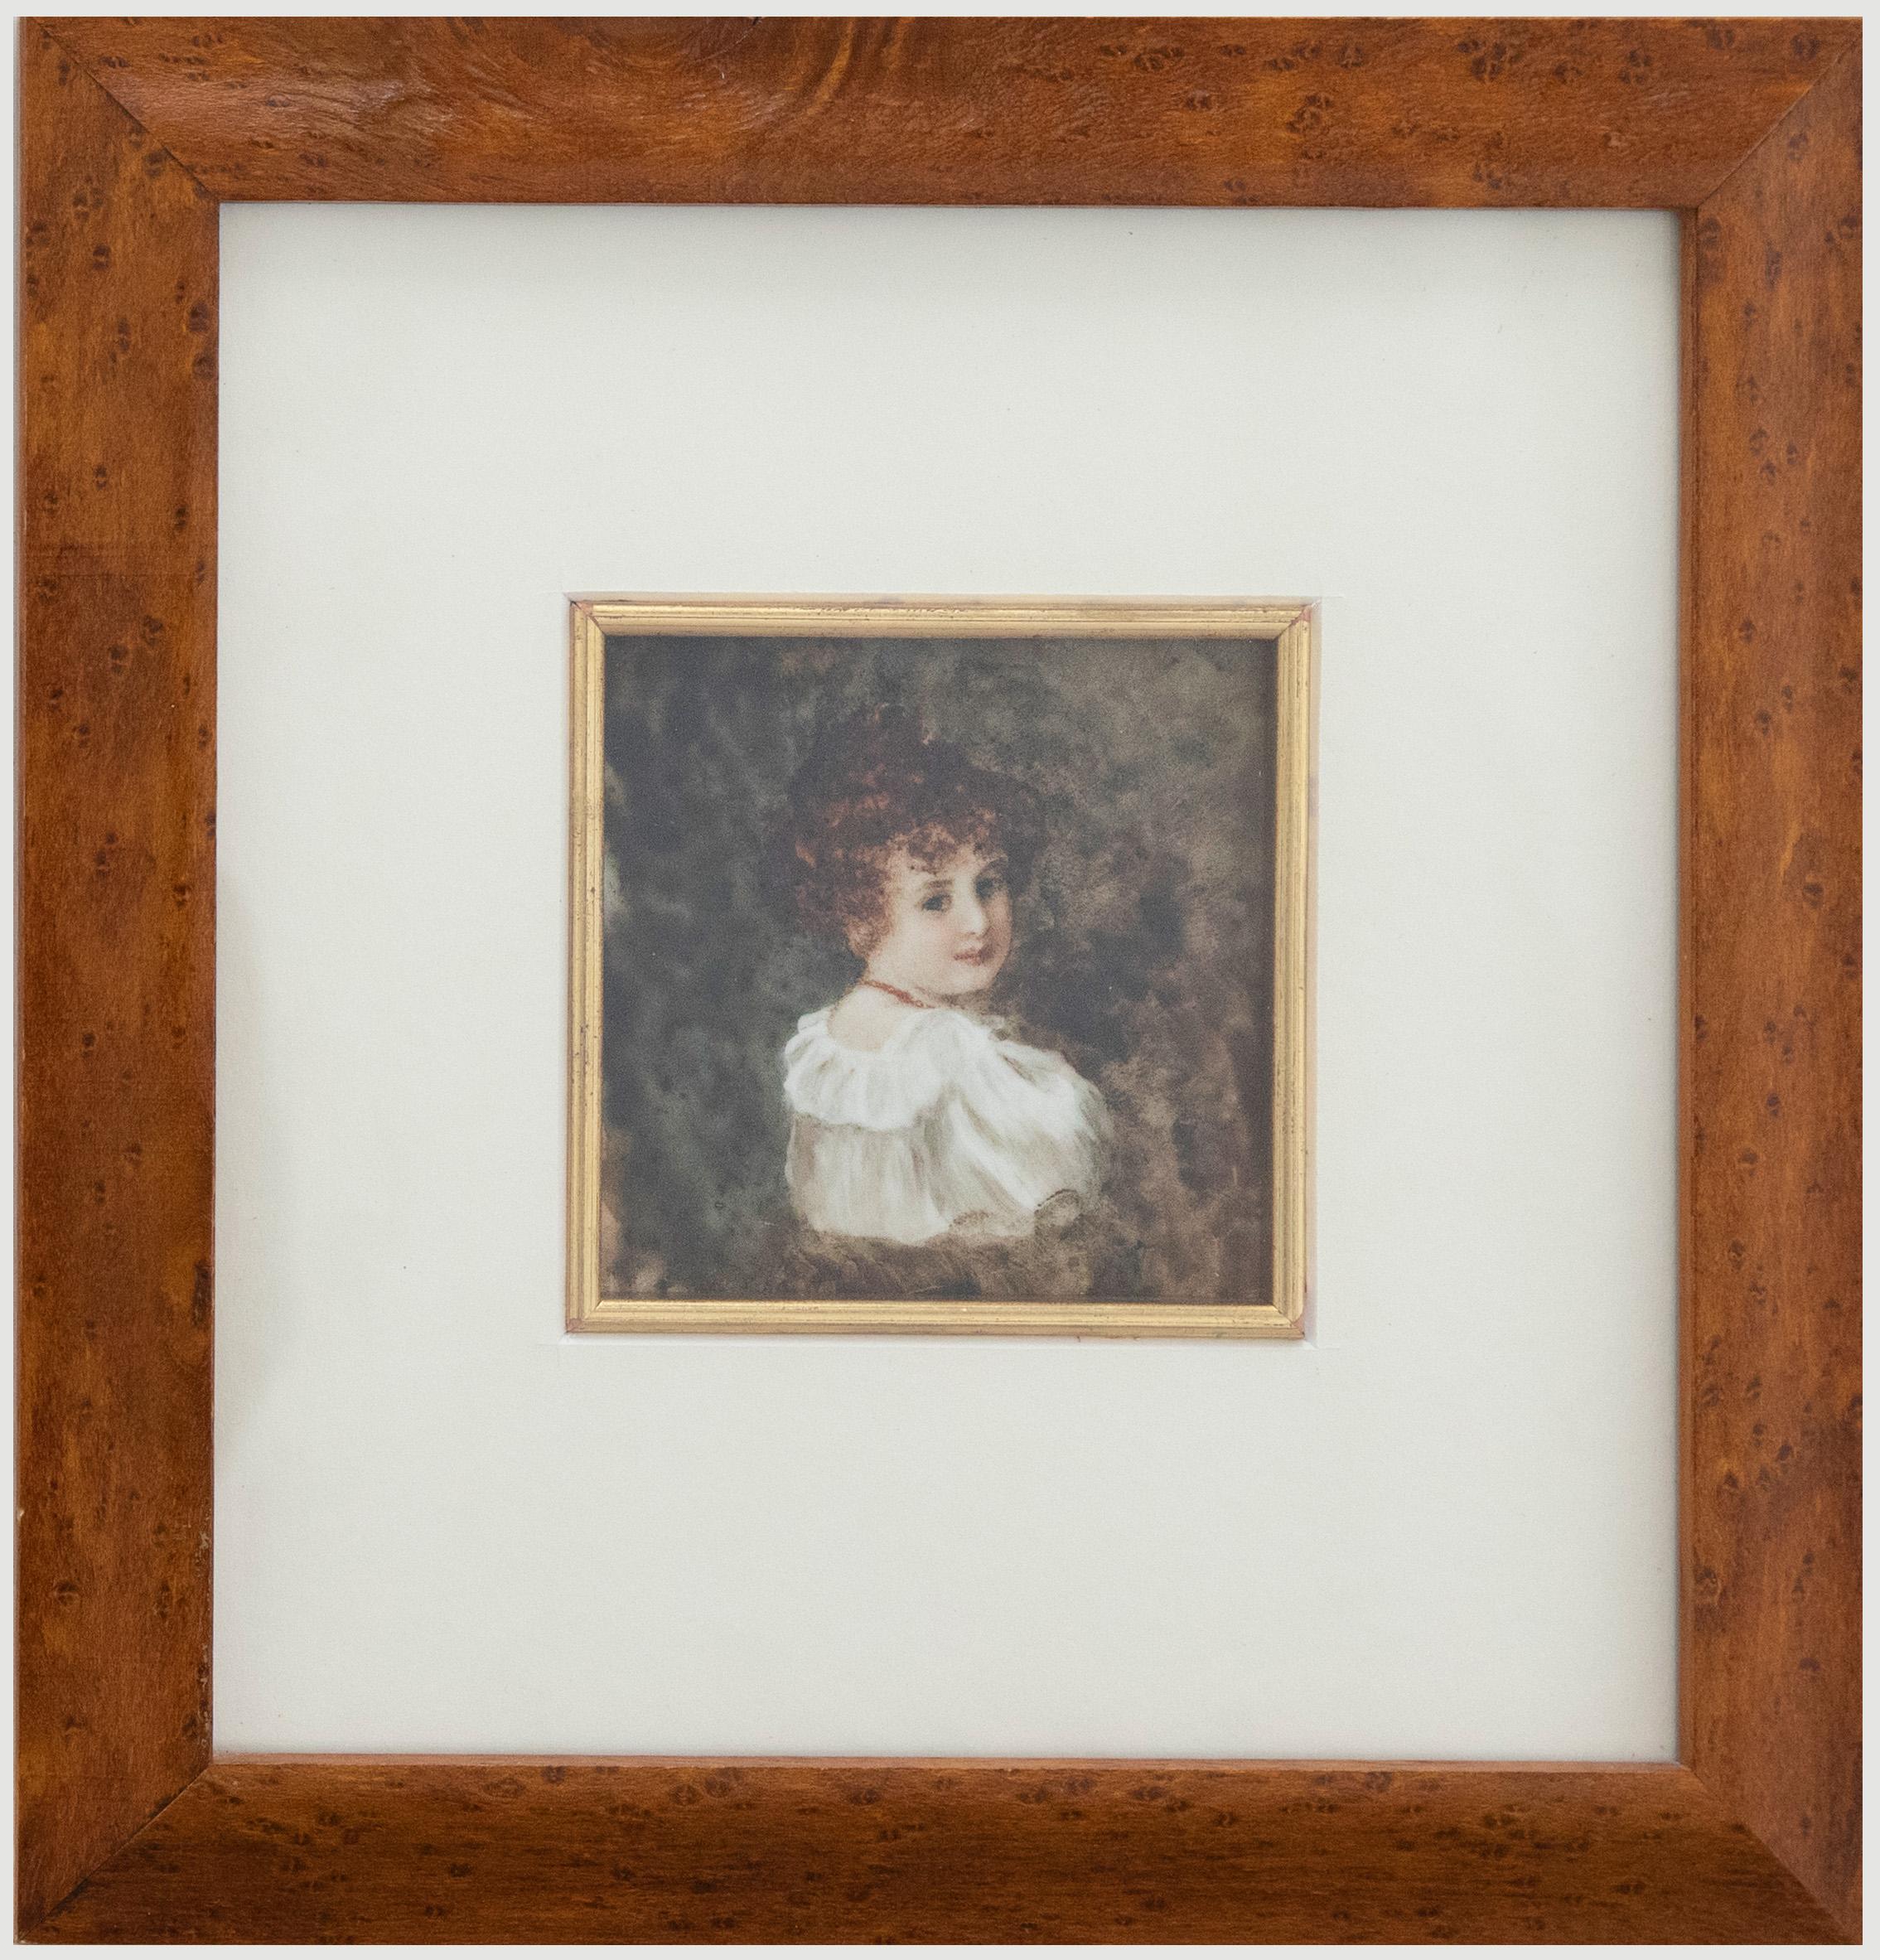 A delicate portrait miniature of a Victorian girl wearing a puffed blouse and beaded red necklace. The girl stands with her back to the viewer, peering over her right-hand shoulder. Well-presented in a fine burr wood frame with a square gilt window